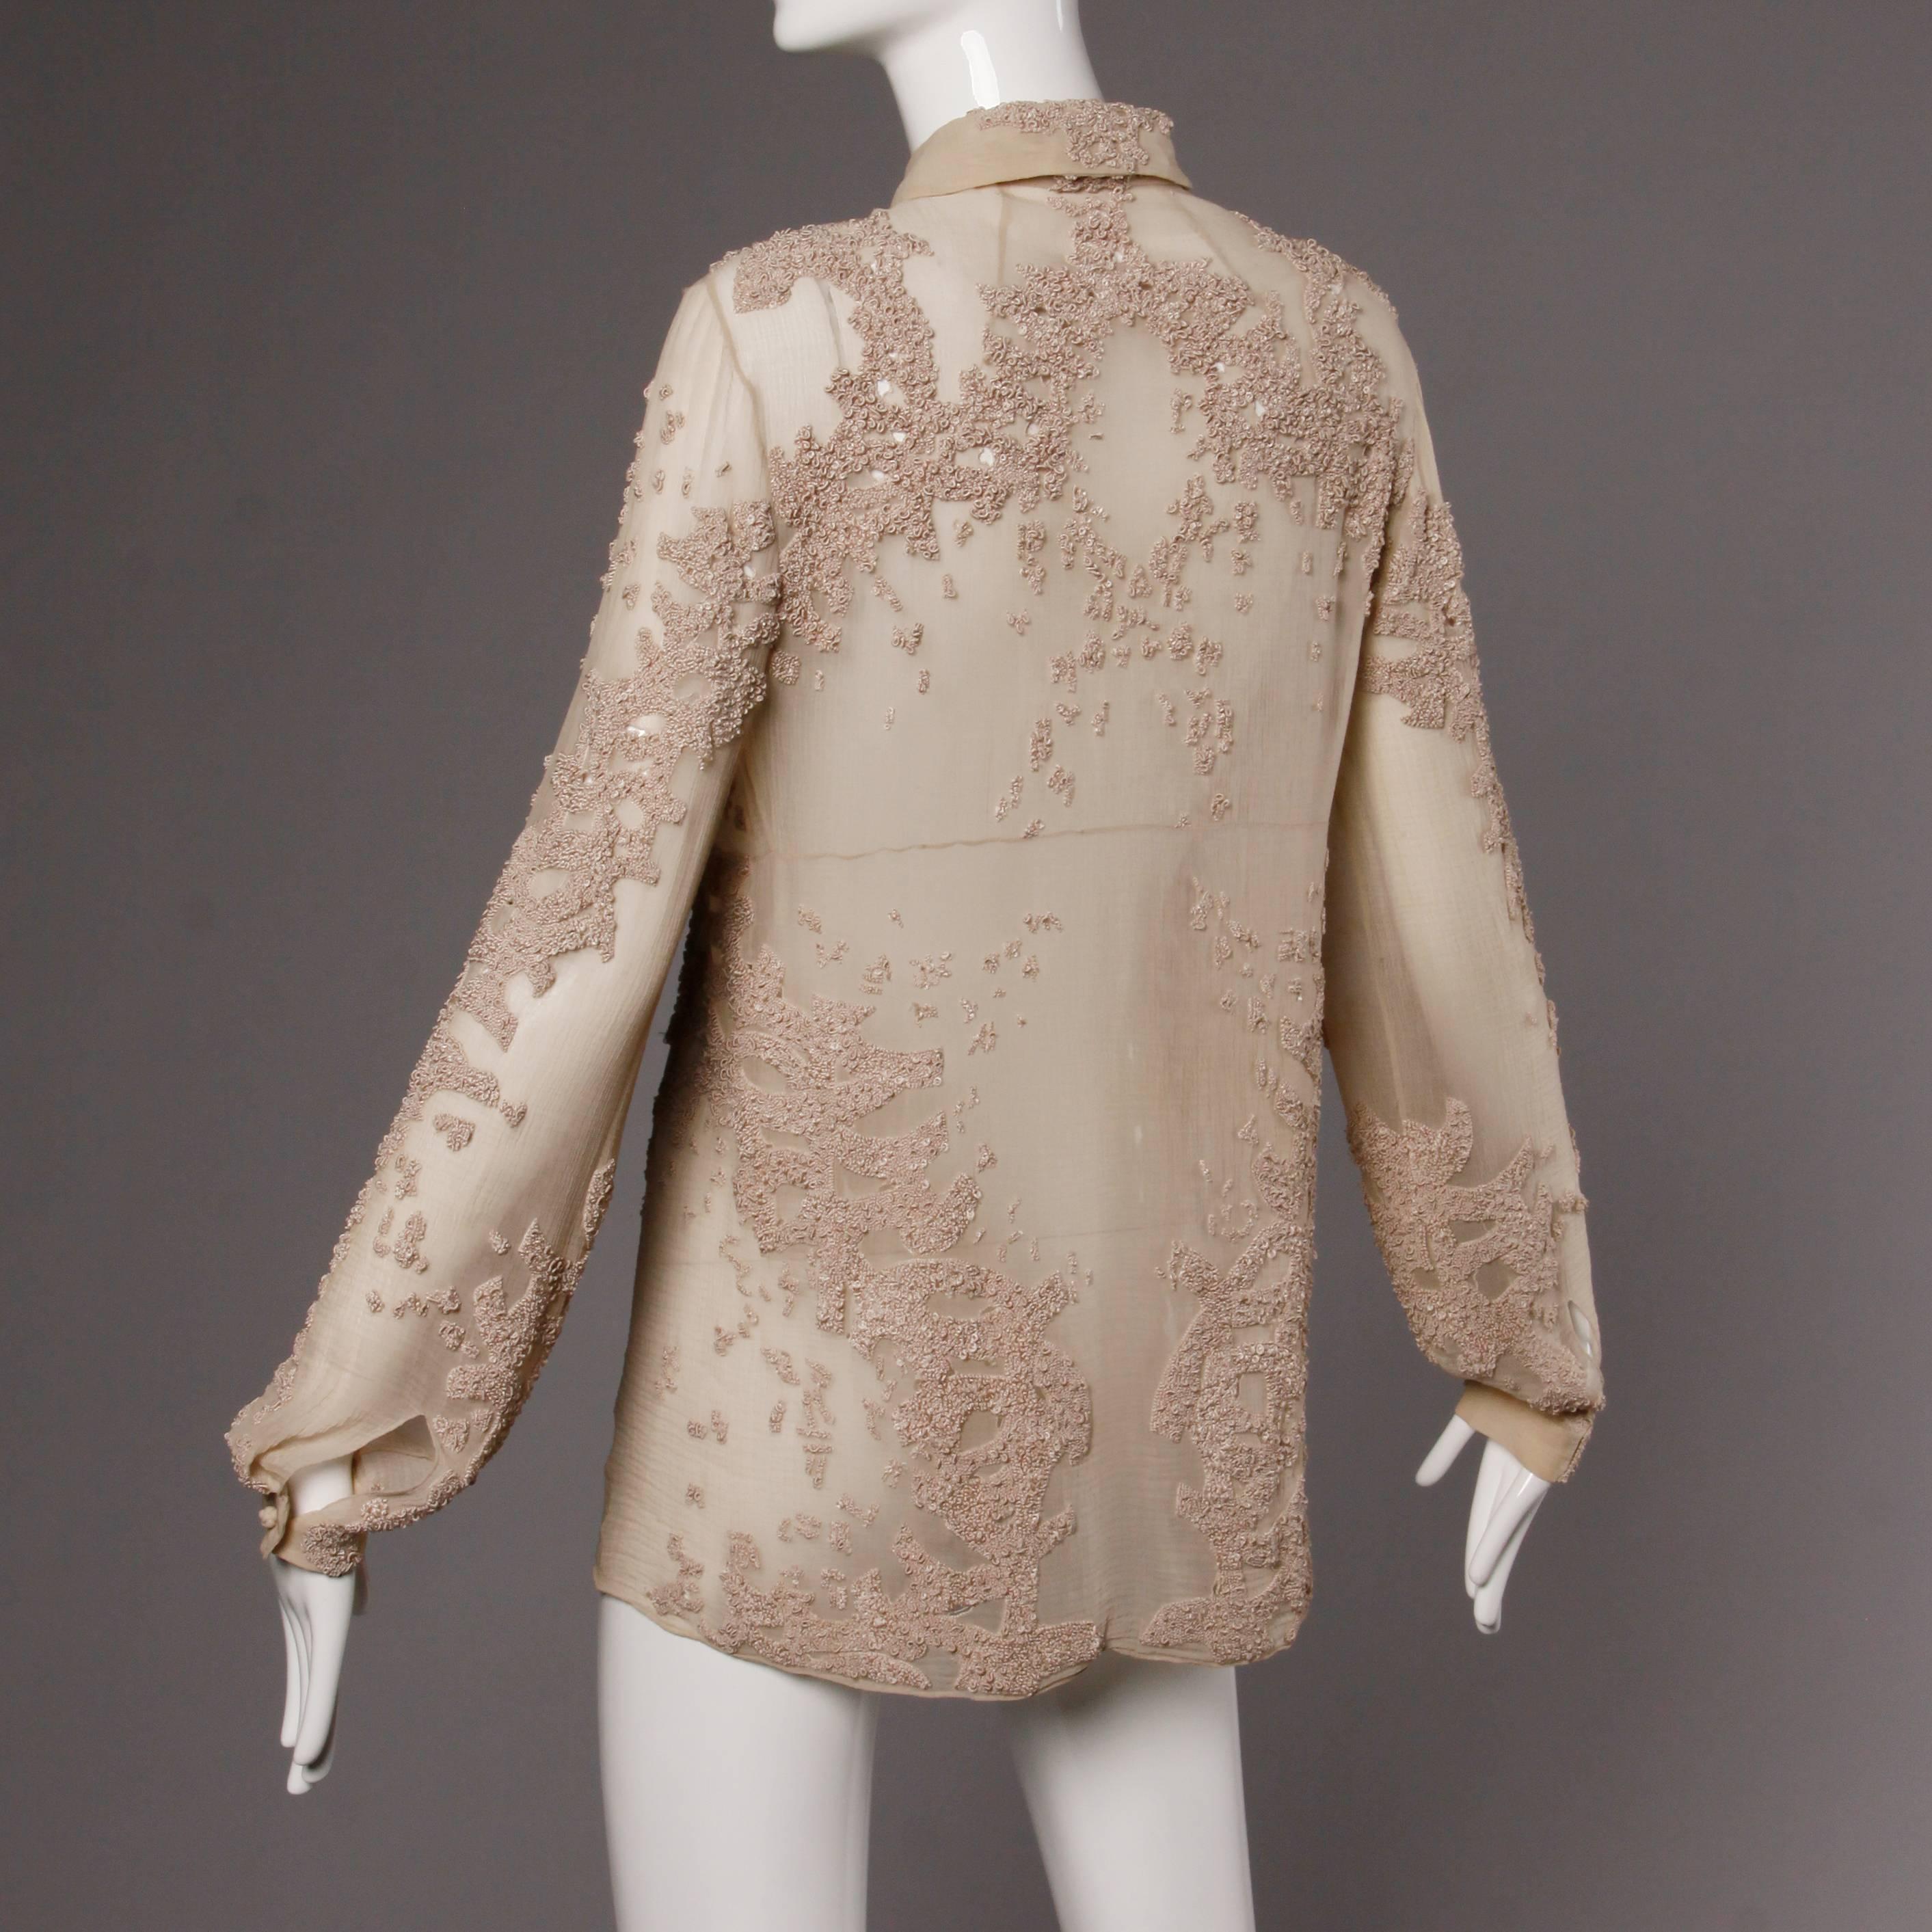 Stunning nude silk button up blouse by Ralph Rucci's line Chado. Tiny cut out detailing with hand embroidery. Unique design. Completely sheer. This top will fit a modern size medium-large.